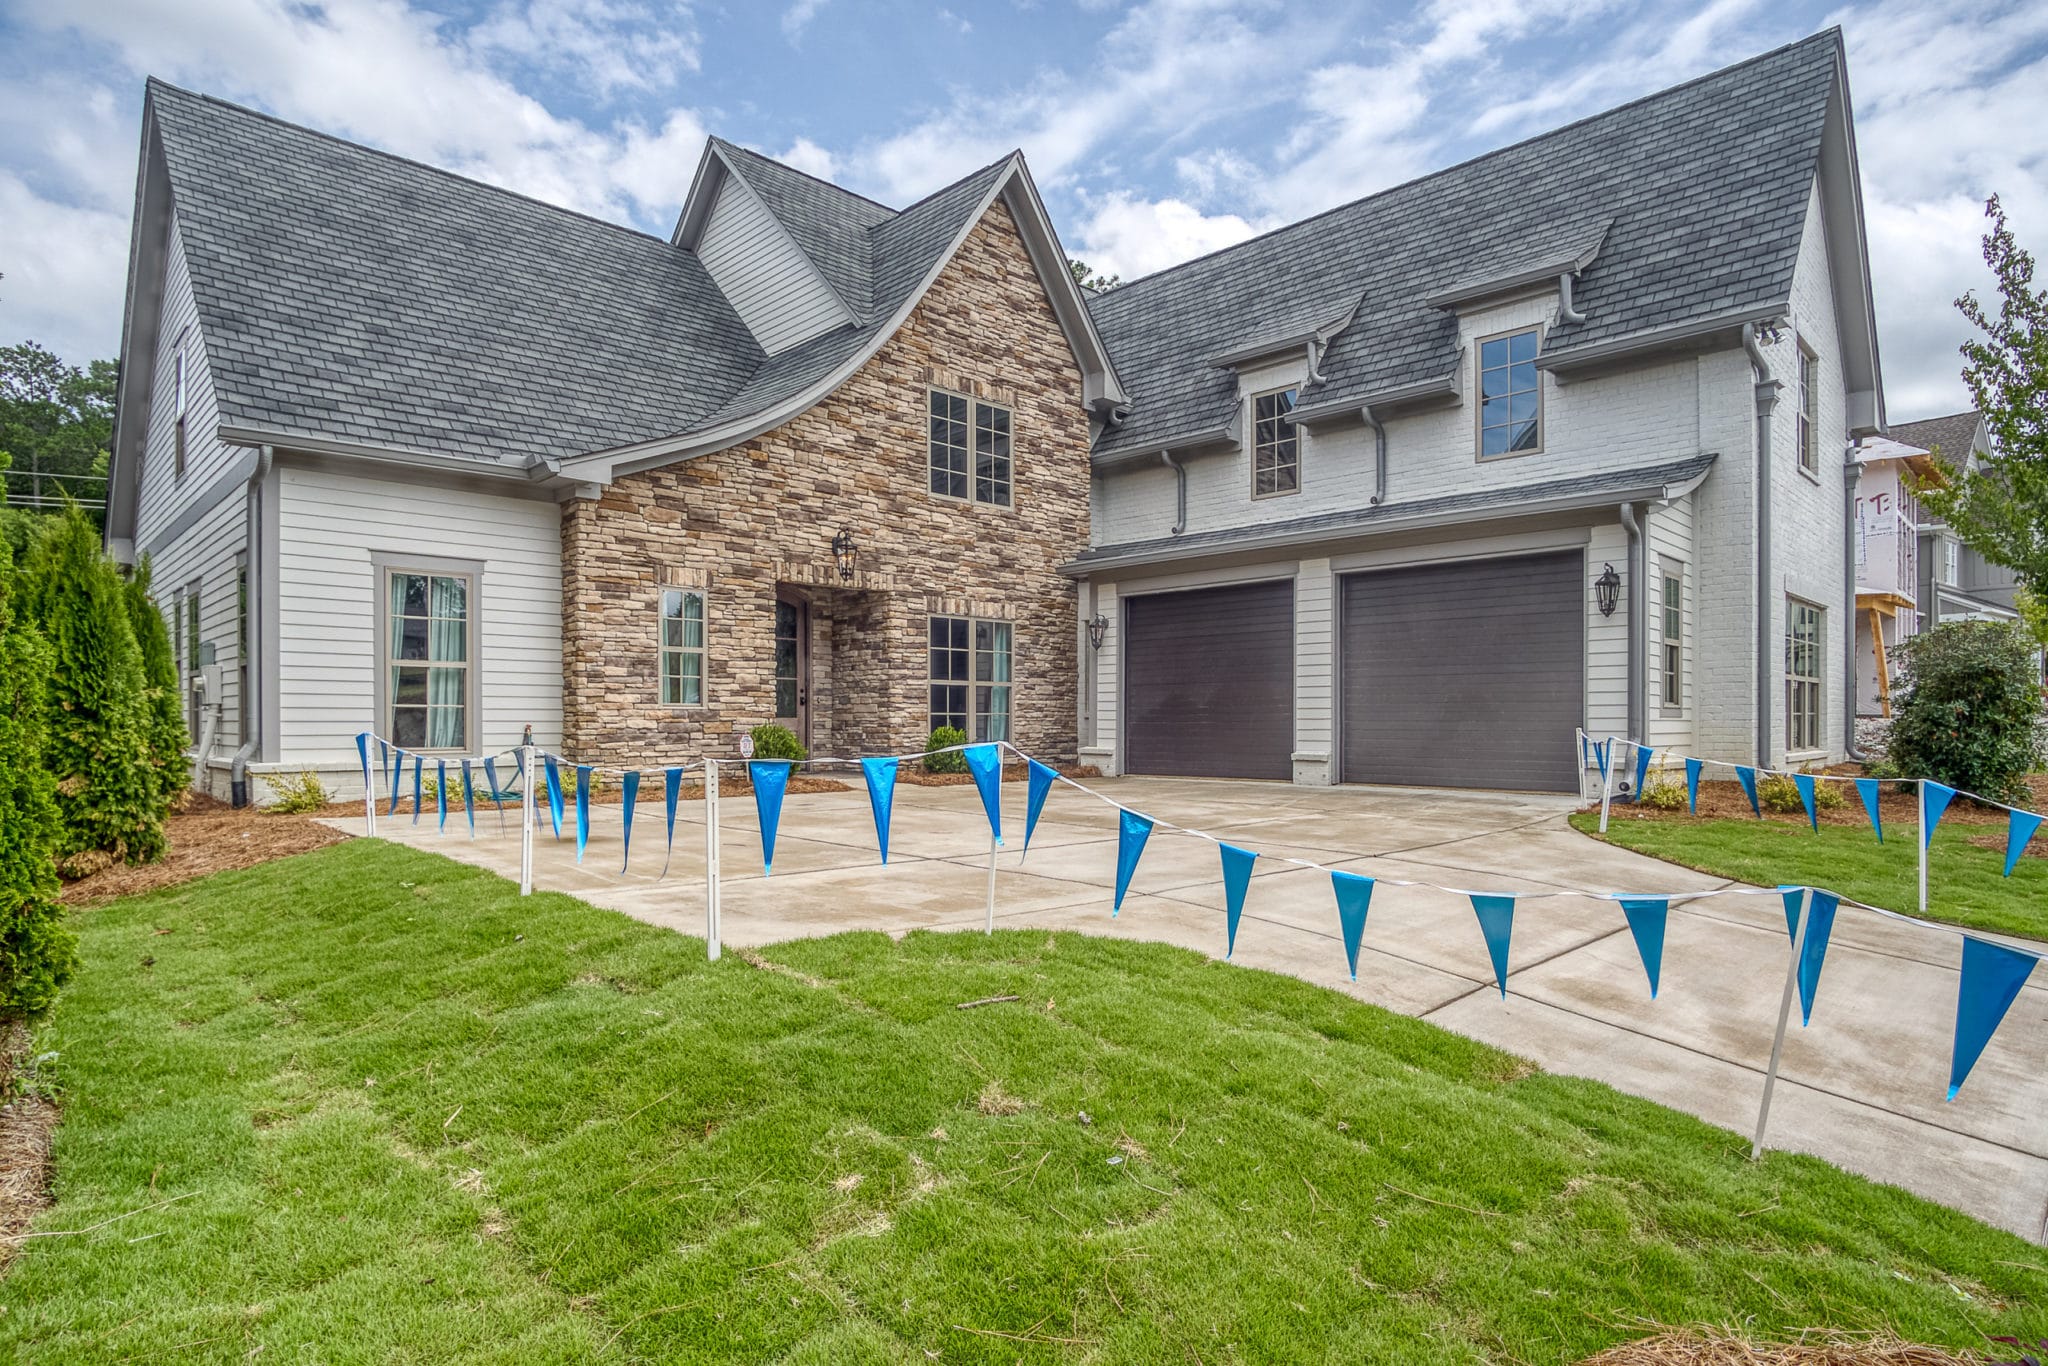 Picture of home driveway and garage port lined with blue flags.